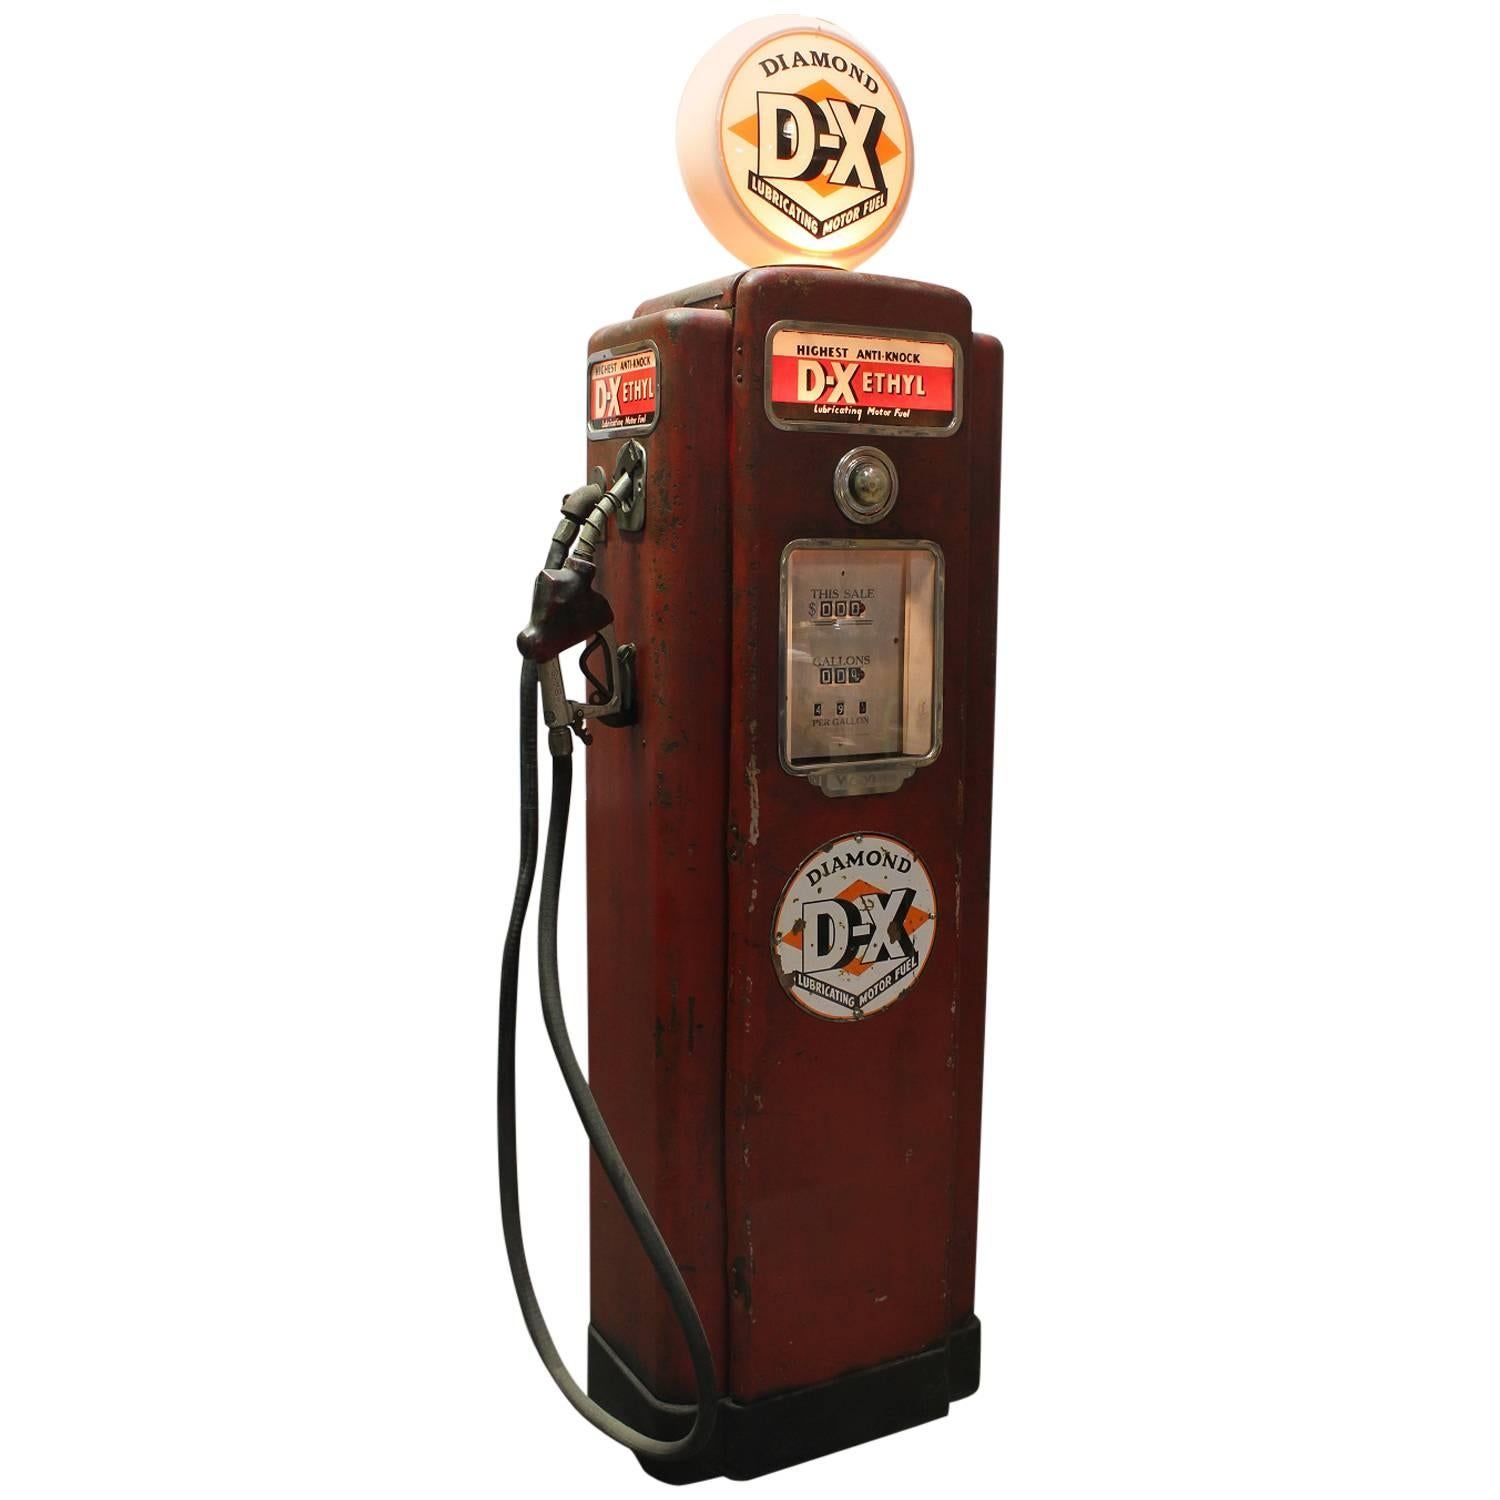 1950s American Gas Pump by Wayne For Sale